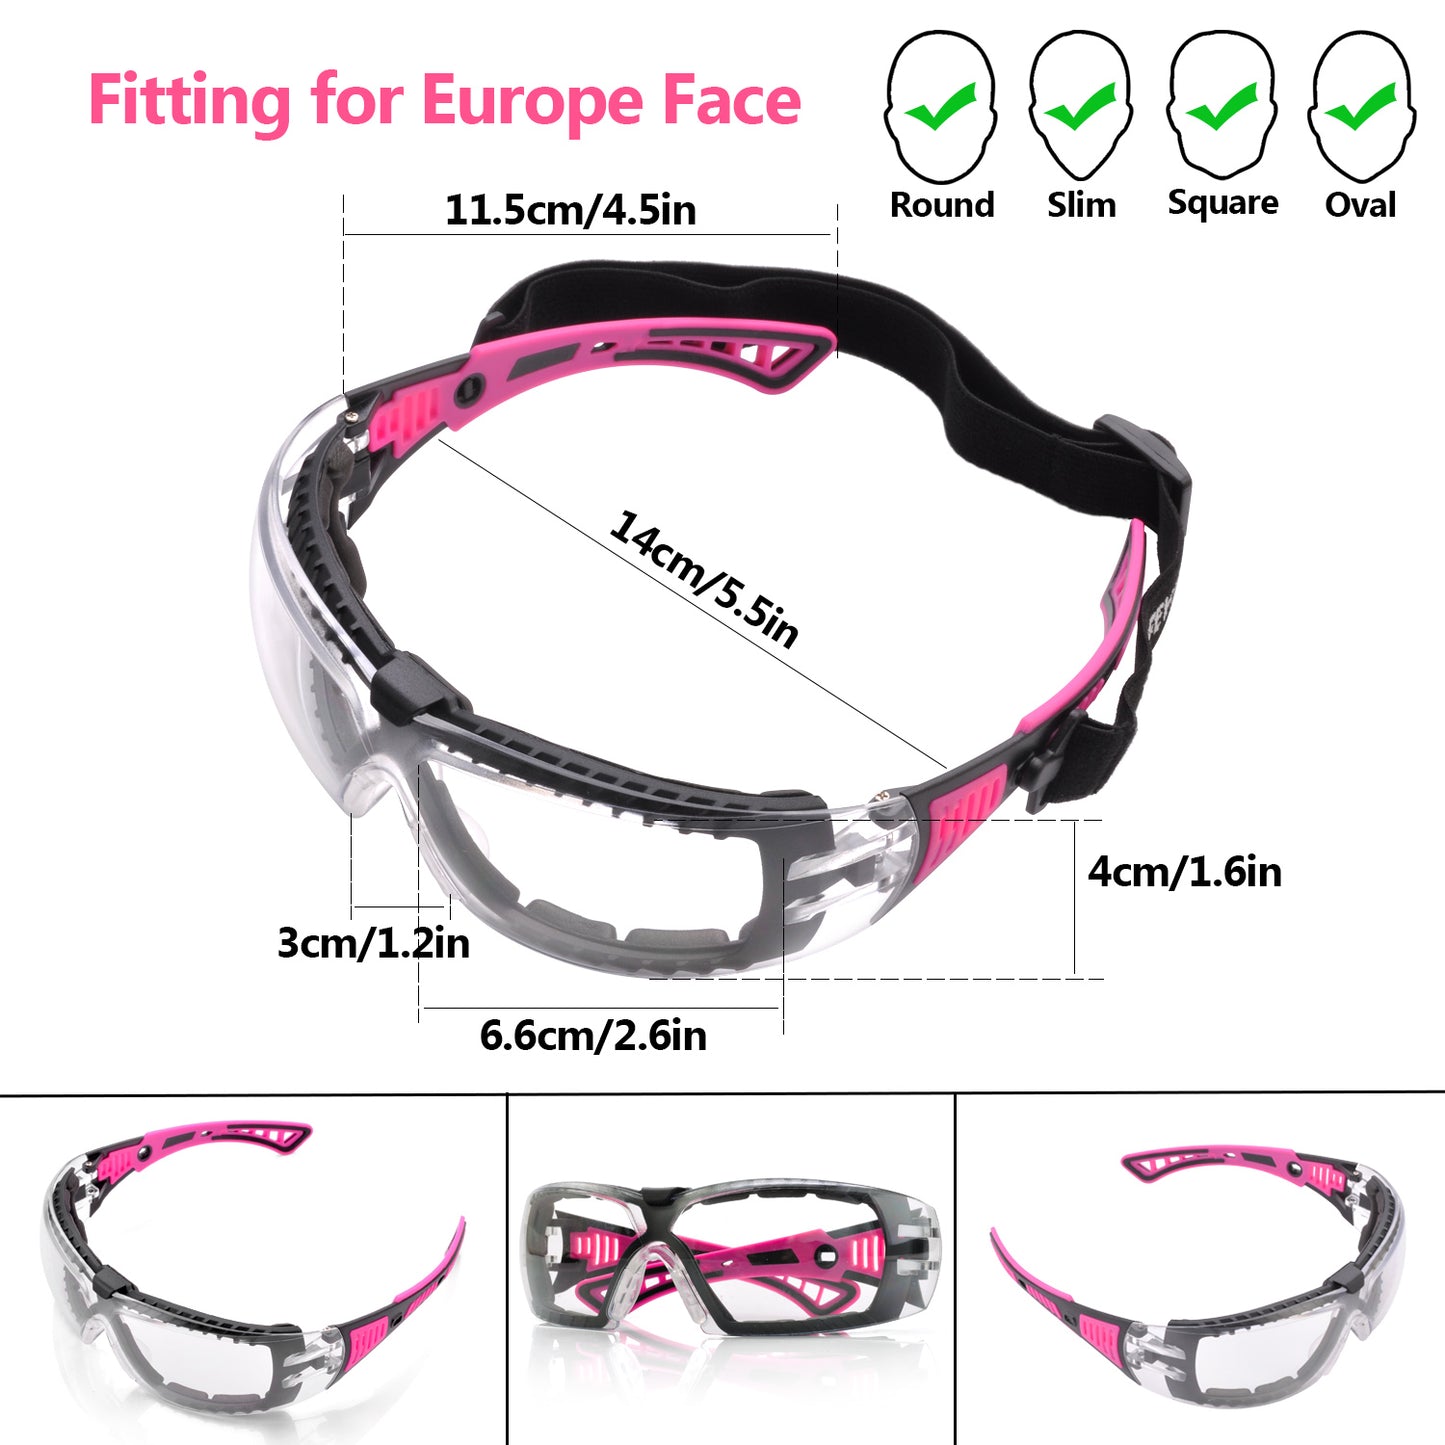 SAFEYEAR Womens Anti Fog Safety Goggles with HD Anti Scratch Resistant Lenses Work Goggles for Women, Adjustable Neck Cord,UV Protection Pink Safety Glasses for DIY, Lab,Grinding,Cycling, MTB